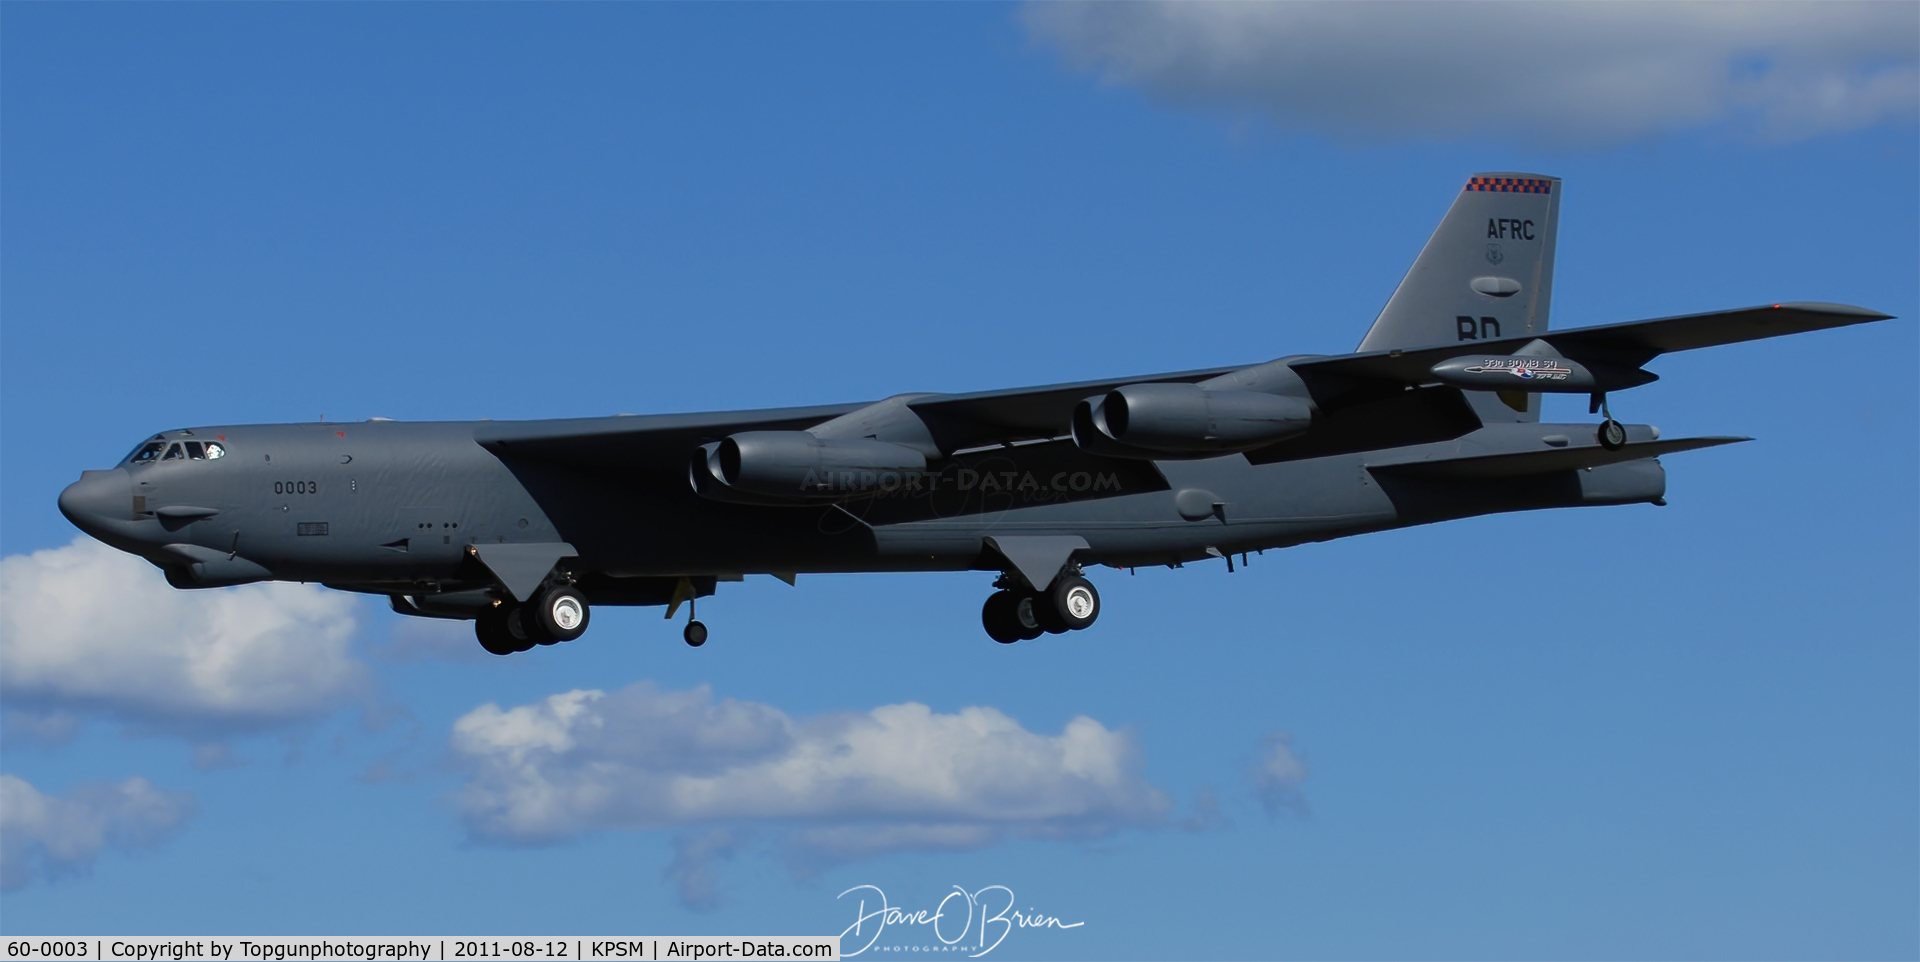 60-0003, 1960 Boeing B-52H Stratofortress C/N 464368, DEATH31 coming in to land.